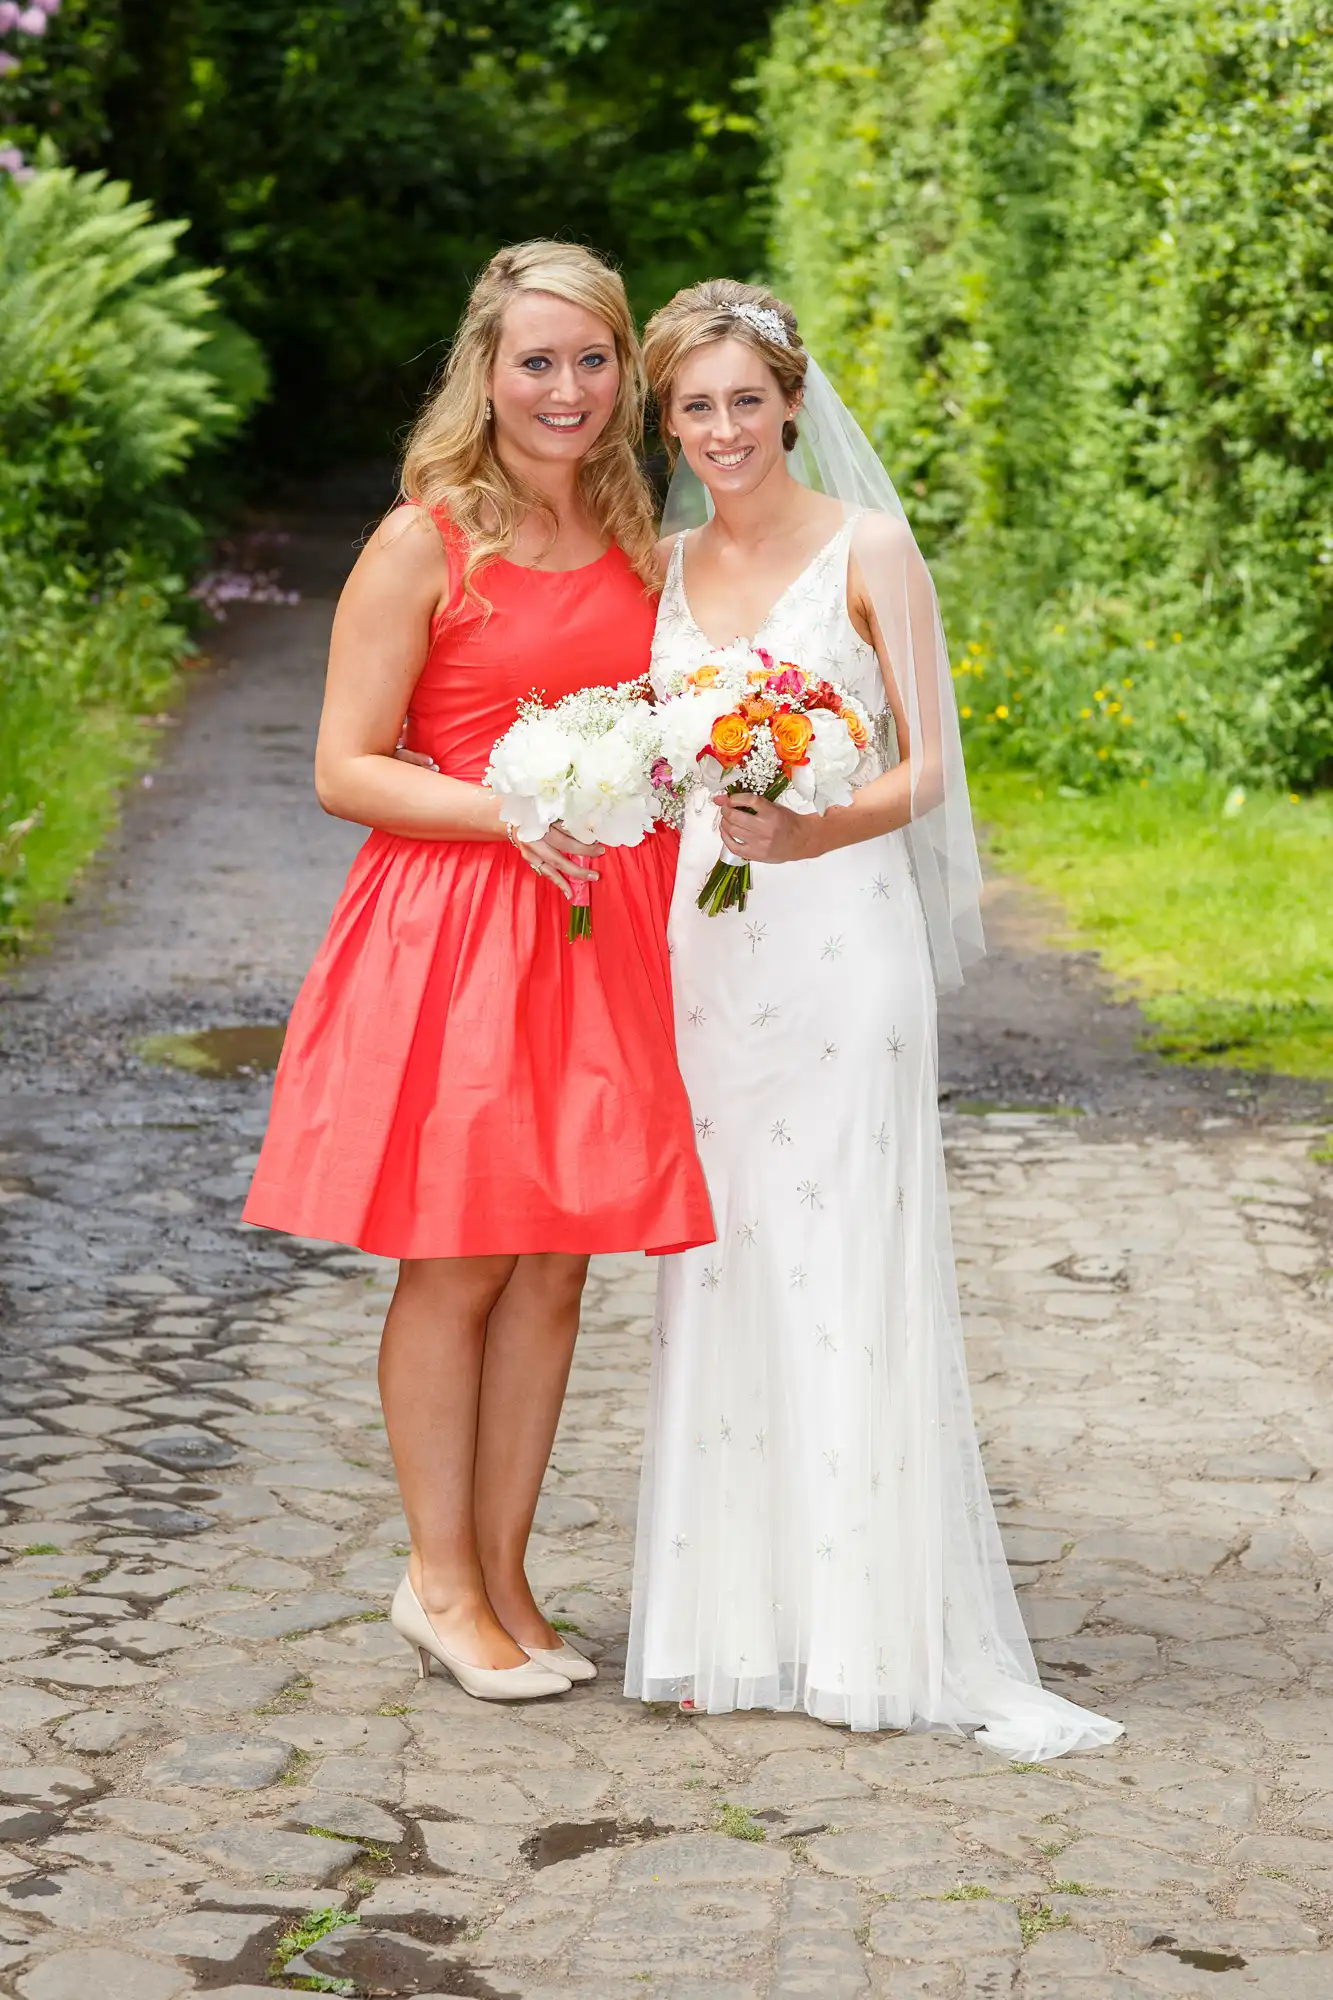 A bride in a white gown and a woman in a red dress smiling, holding bouquets on a garden path.